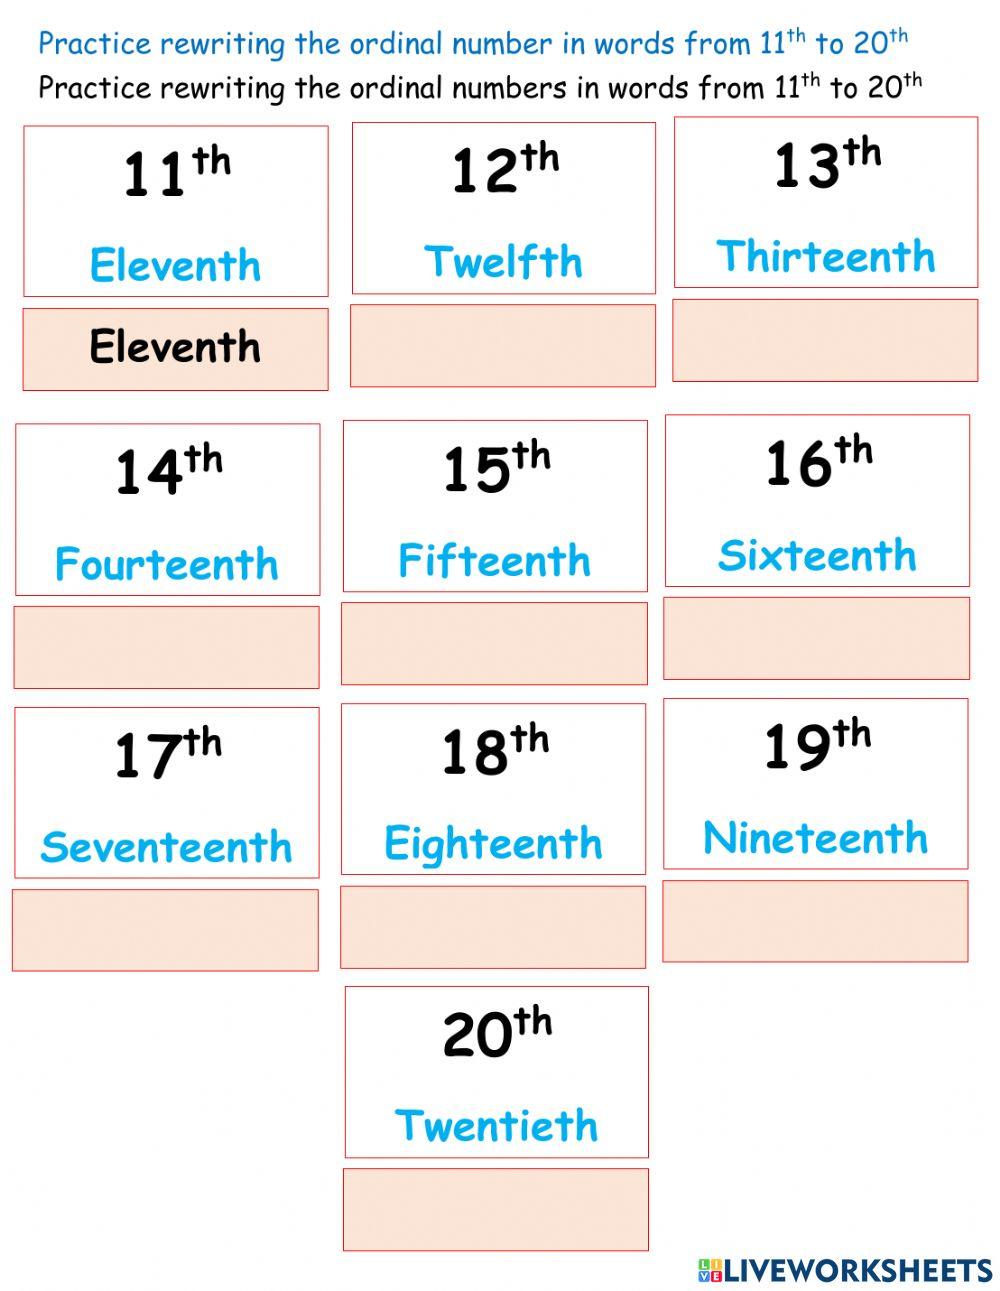 Ordinal numbers 11th -20th